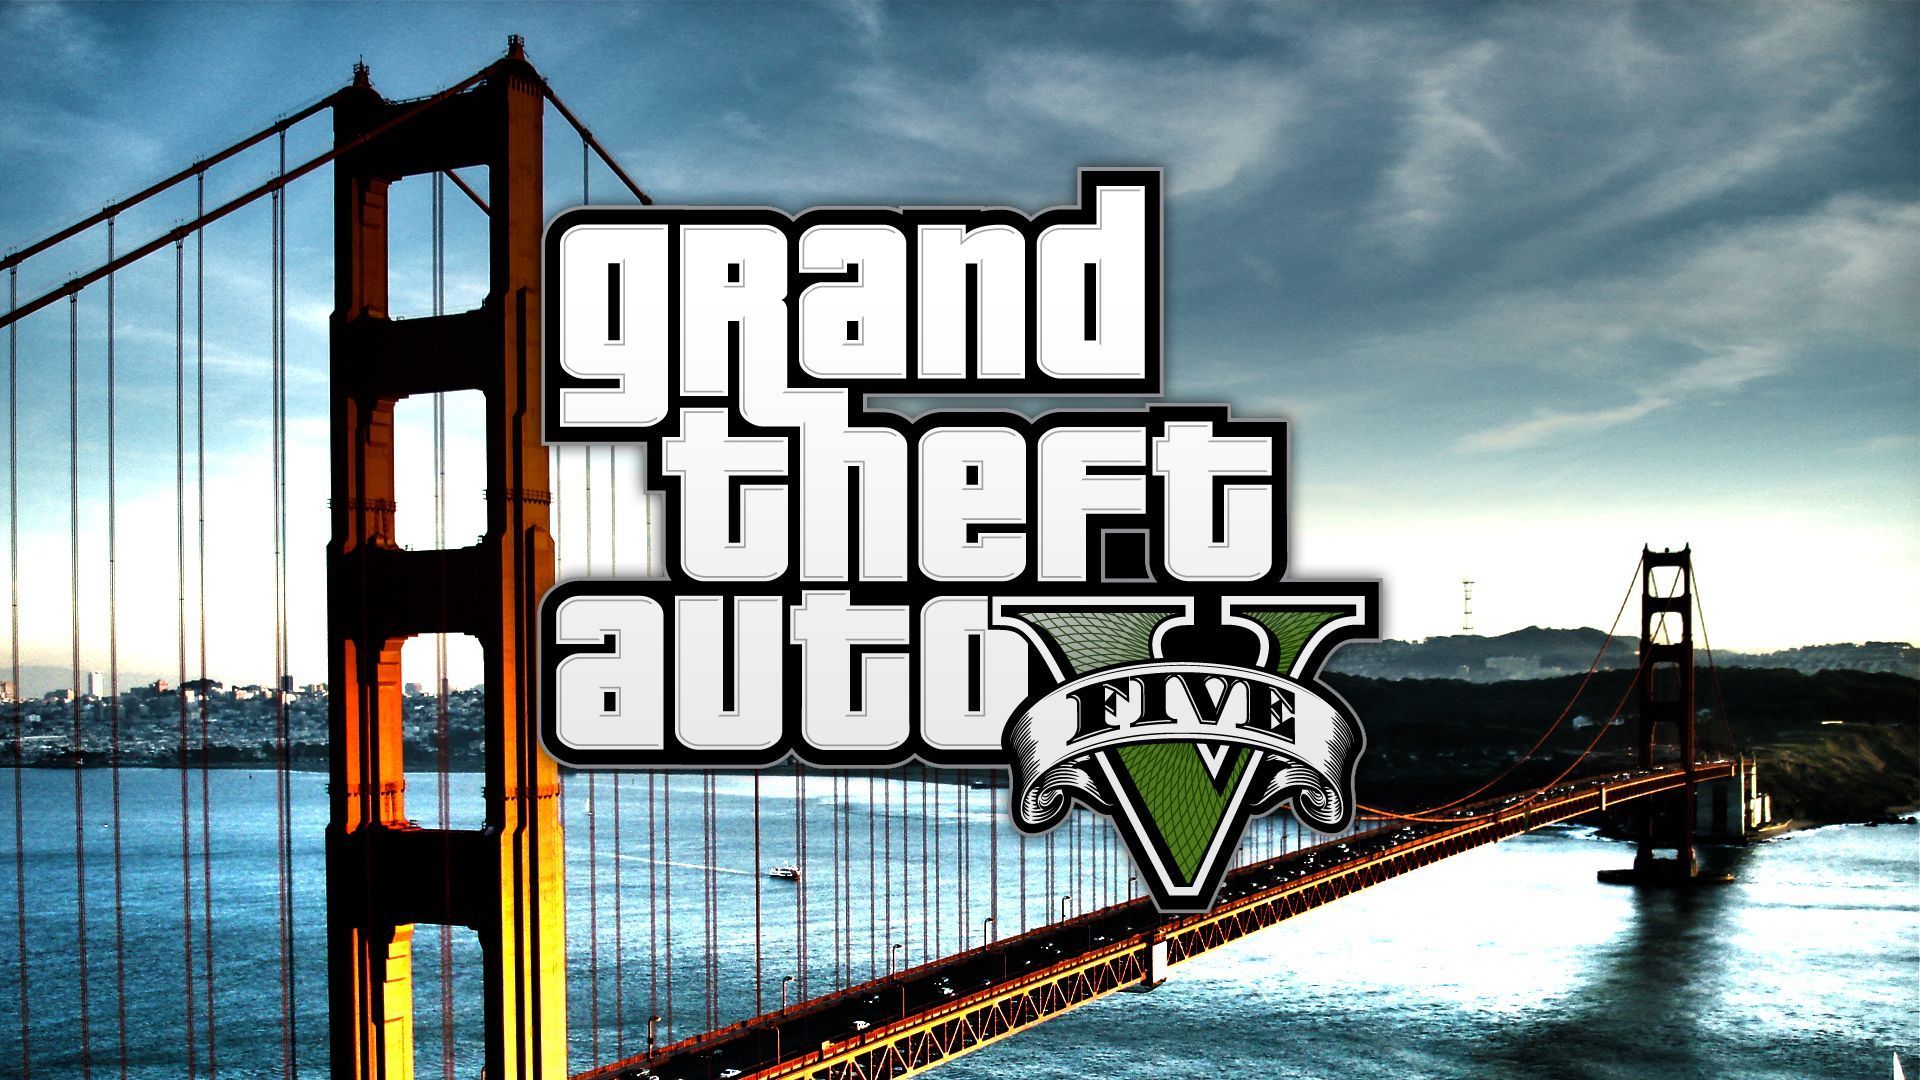 GTA 5 Wallpaper For Desktop and You Like Grand Theft Auto 5 Backgrounds